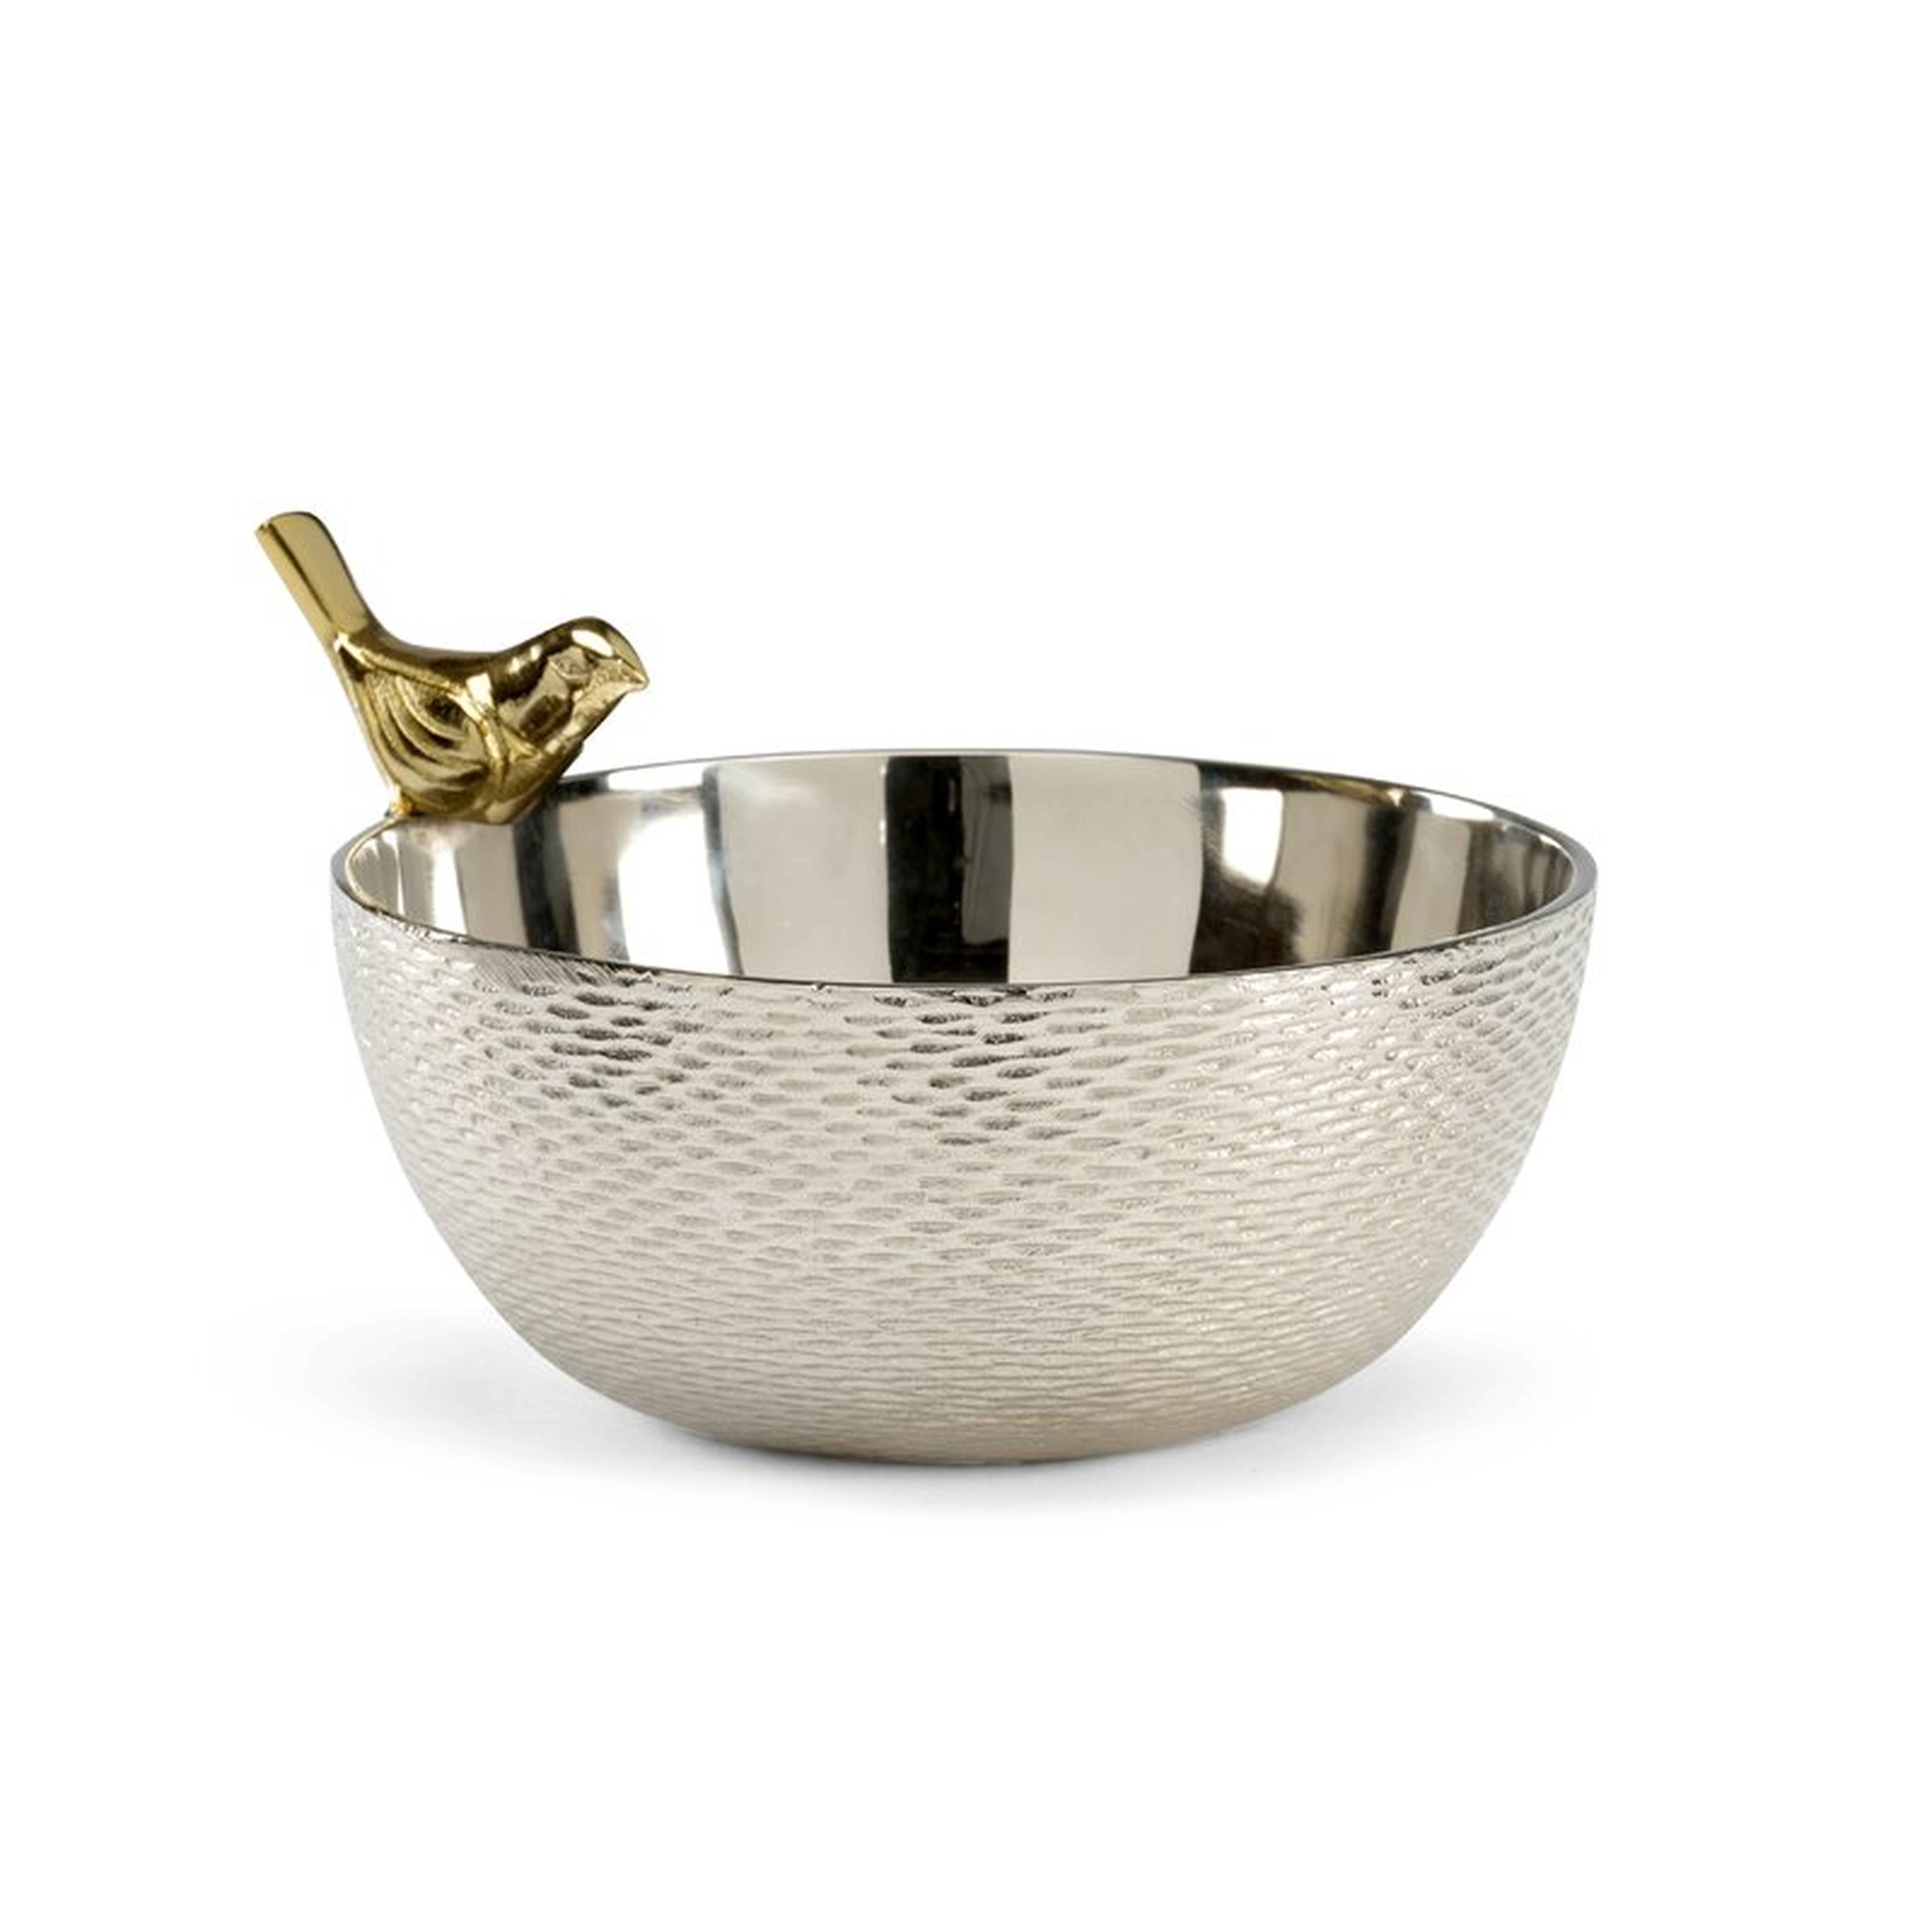 Wildwood Chirp Metal Oval Decorative Bowl in Polished Nickel/Polished Brass - Perigold